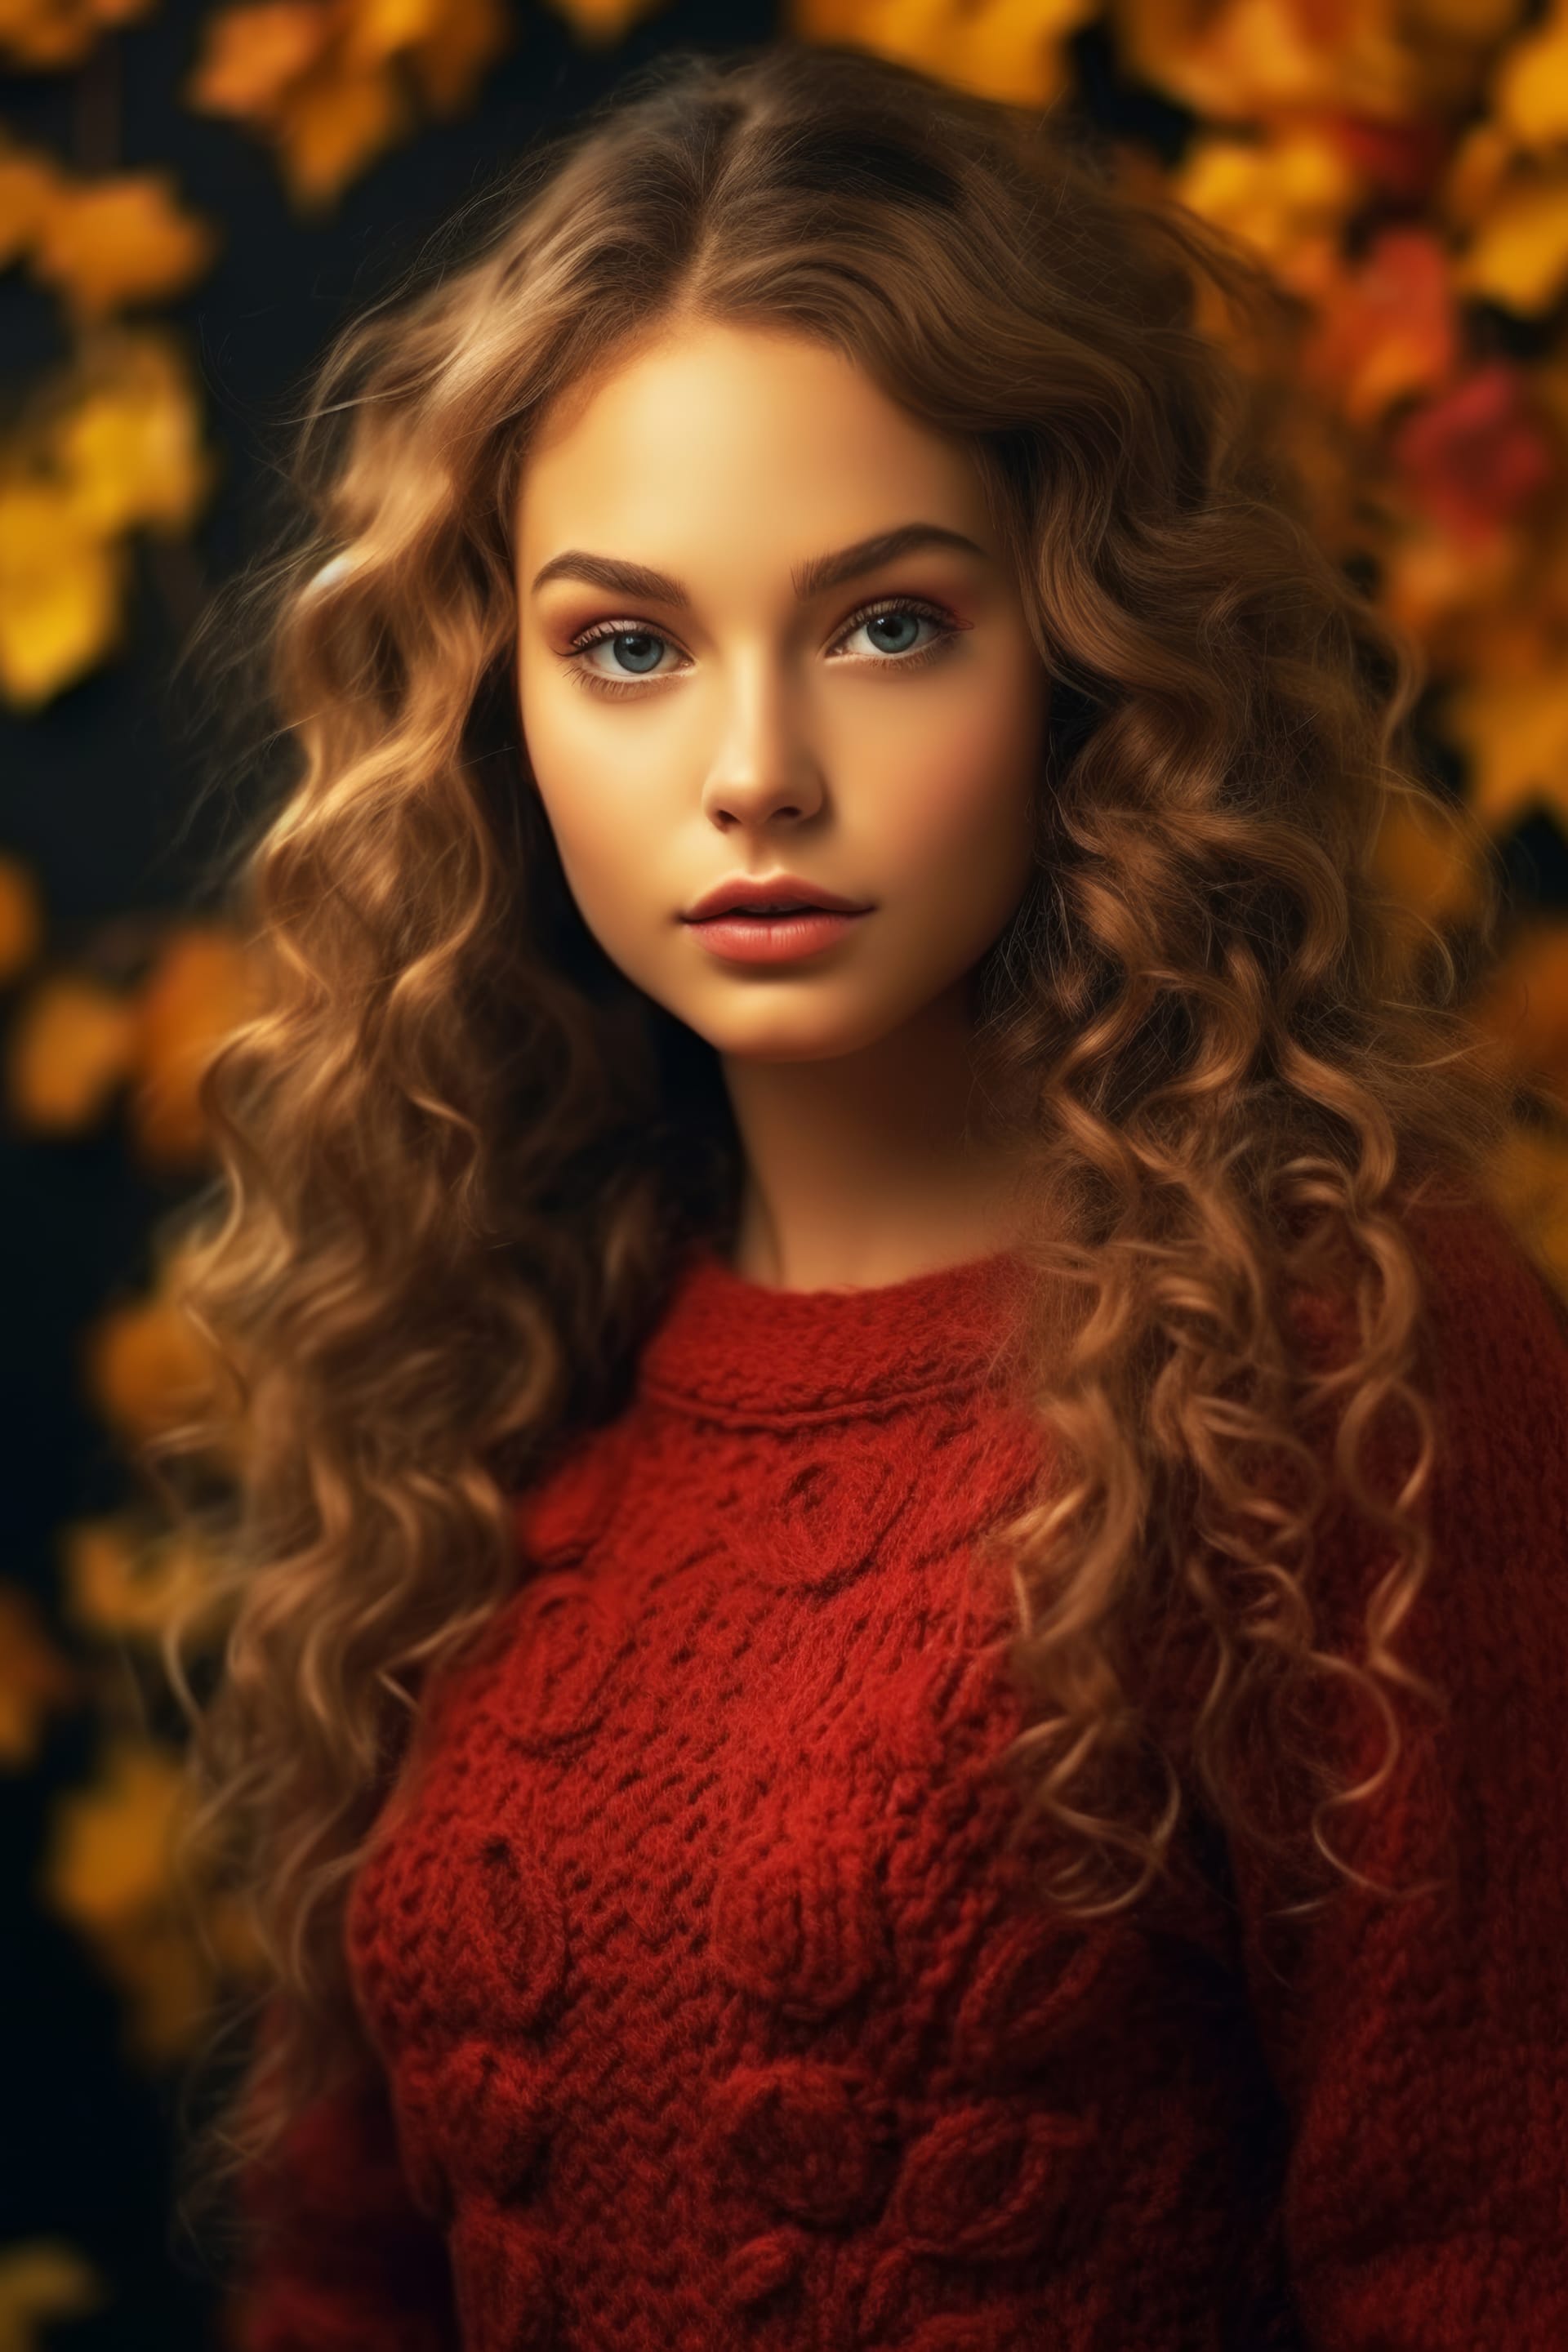 Beautiful young girl with curly hair red sweater